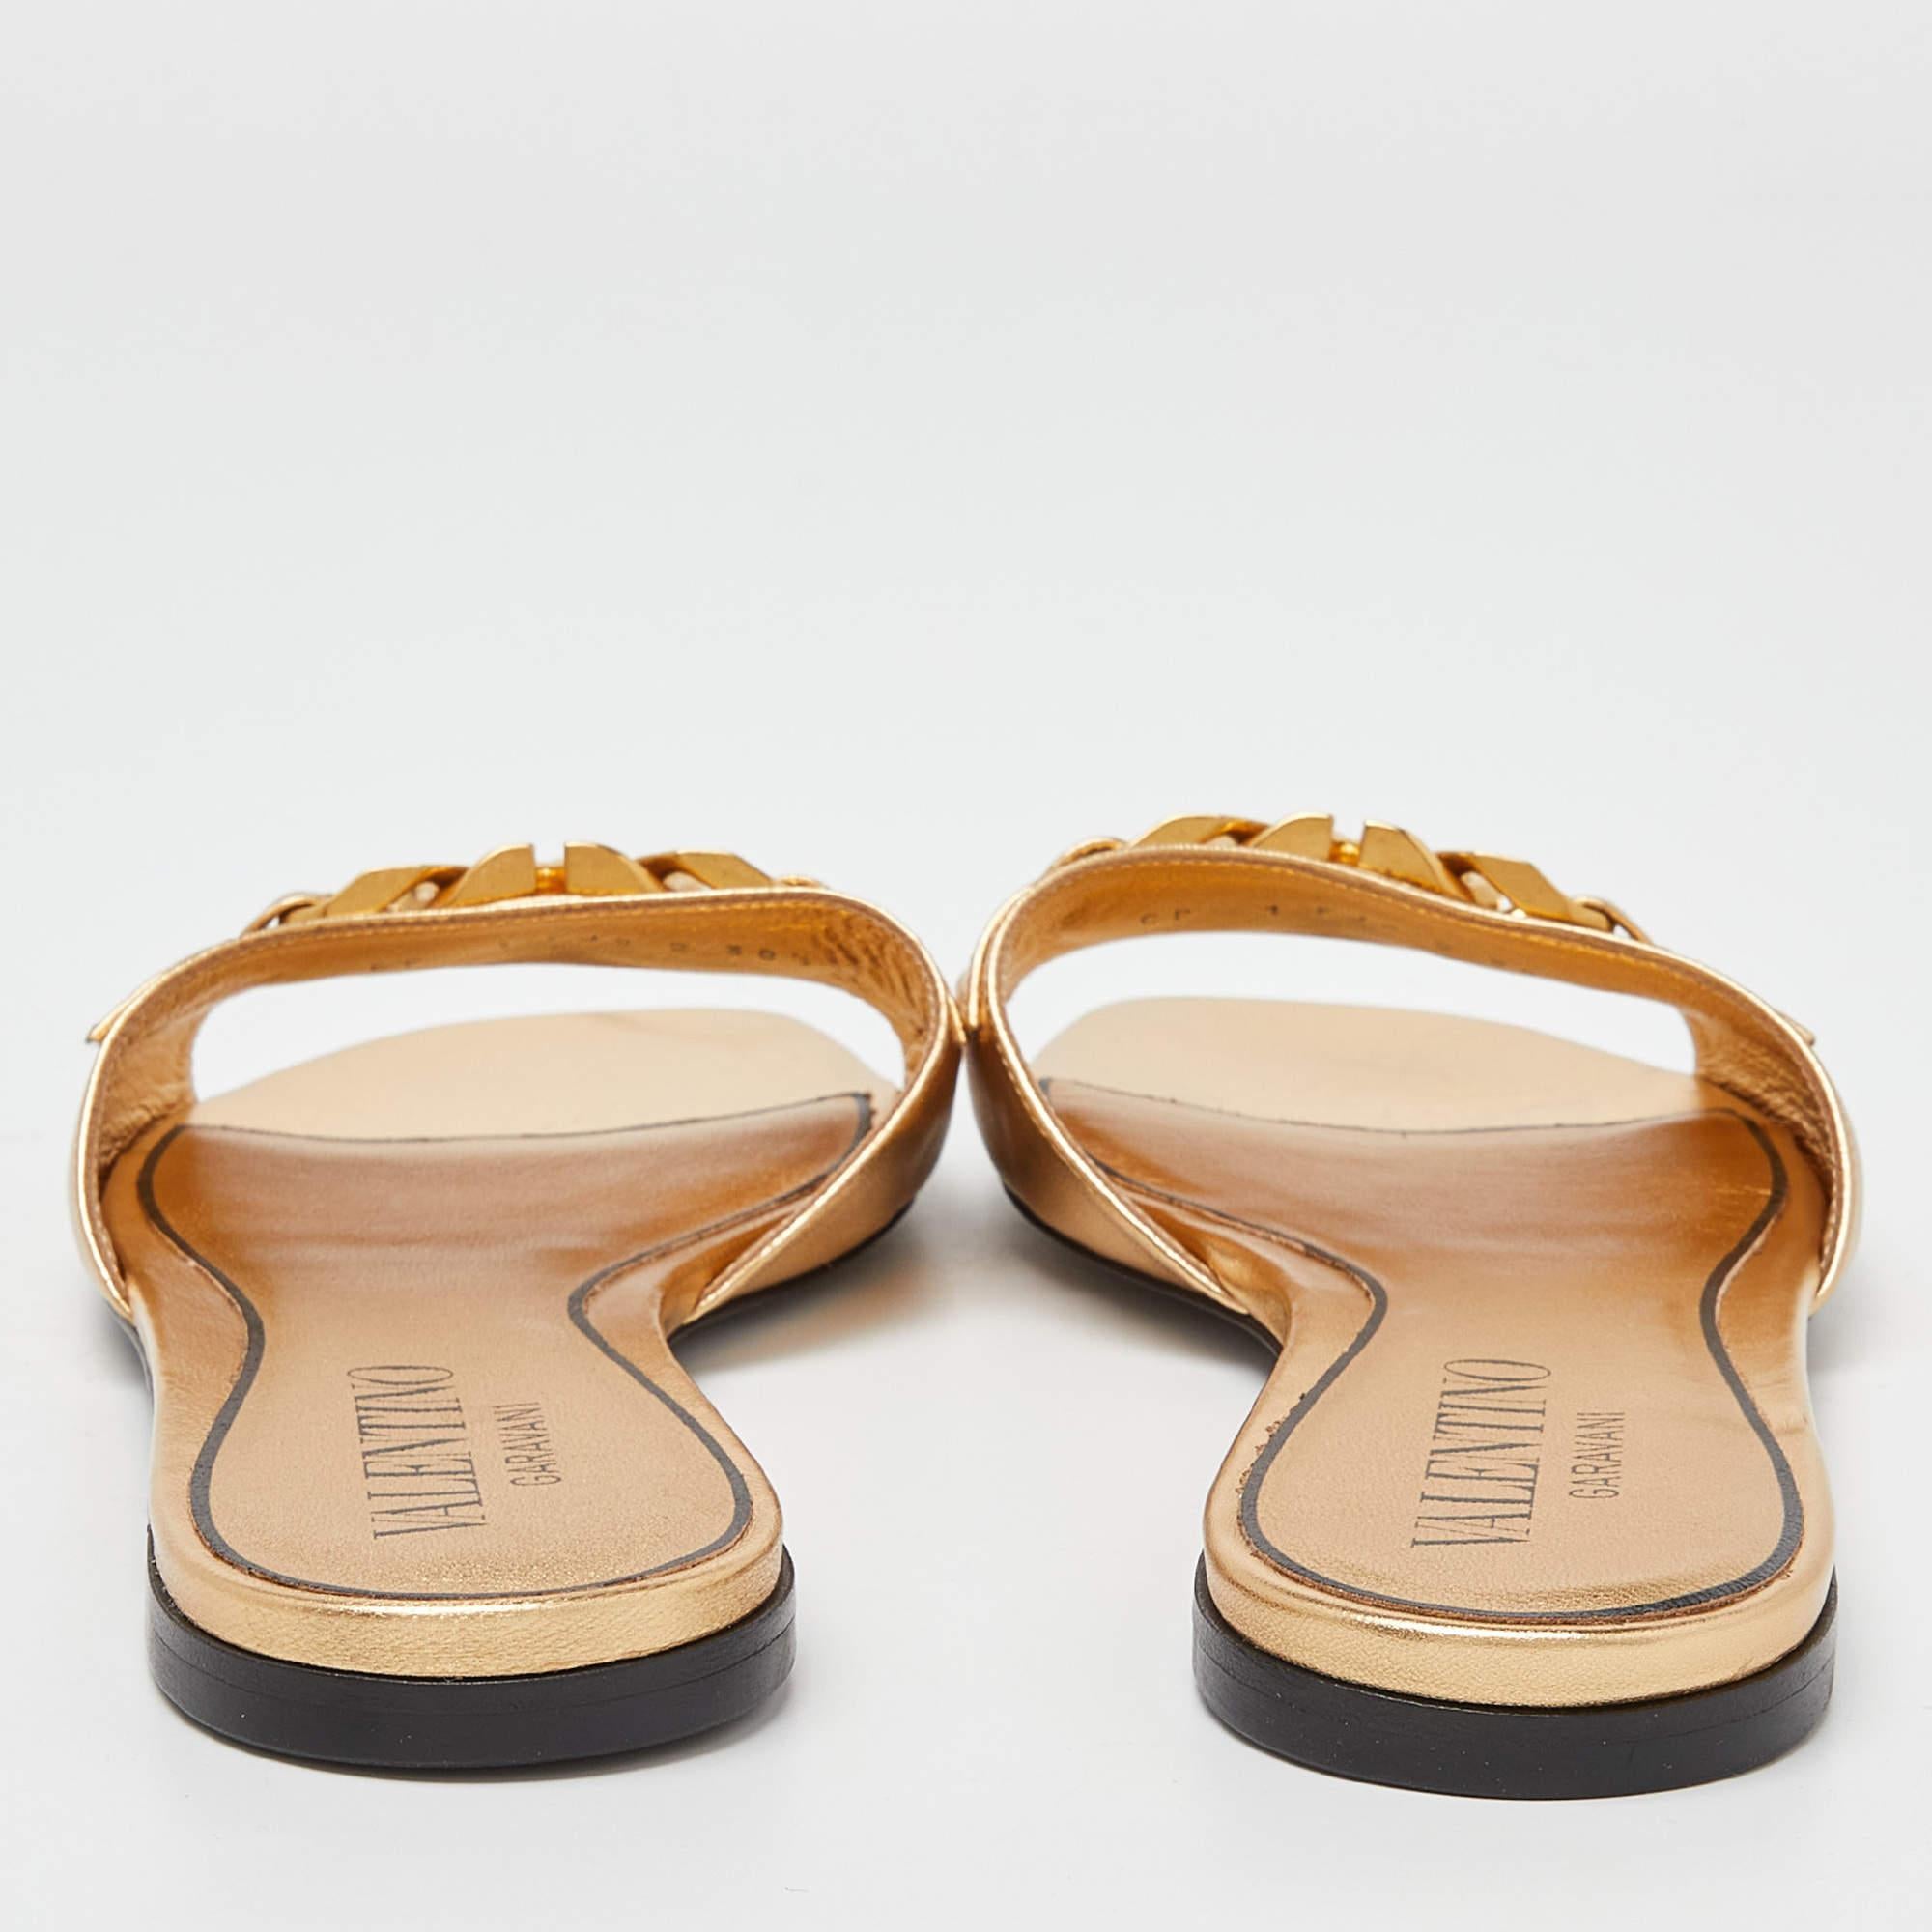 Frame your feet with these Valentino gold flat sandals. Created using the best materials, the flats are perfect with short, midi, and maxi hemlines.

